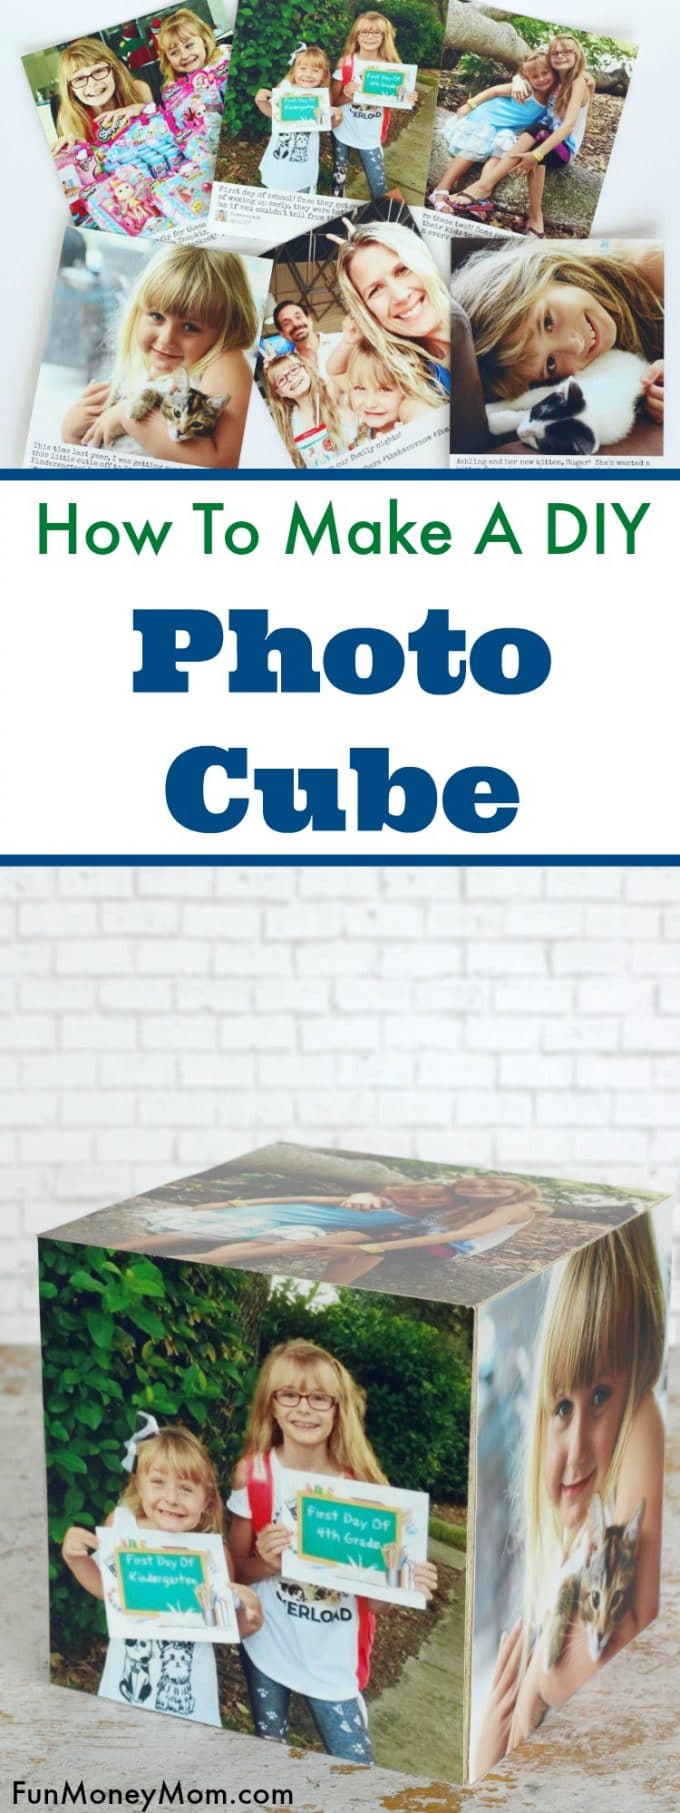 Photos always make the best home decor and this easy DIY photo cube is a fun way to display all your favorite family photos.